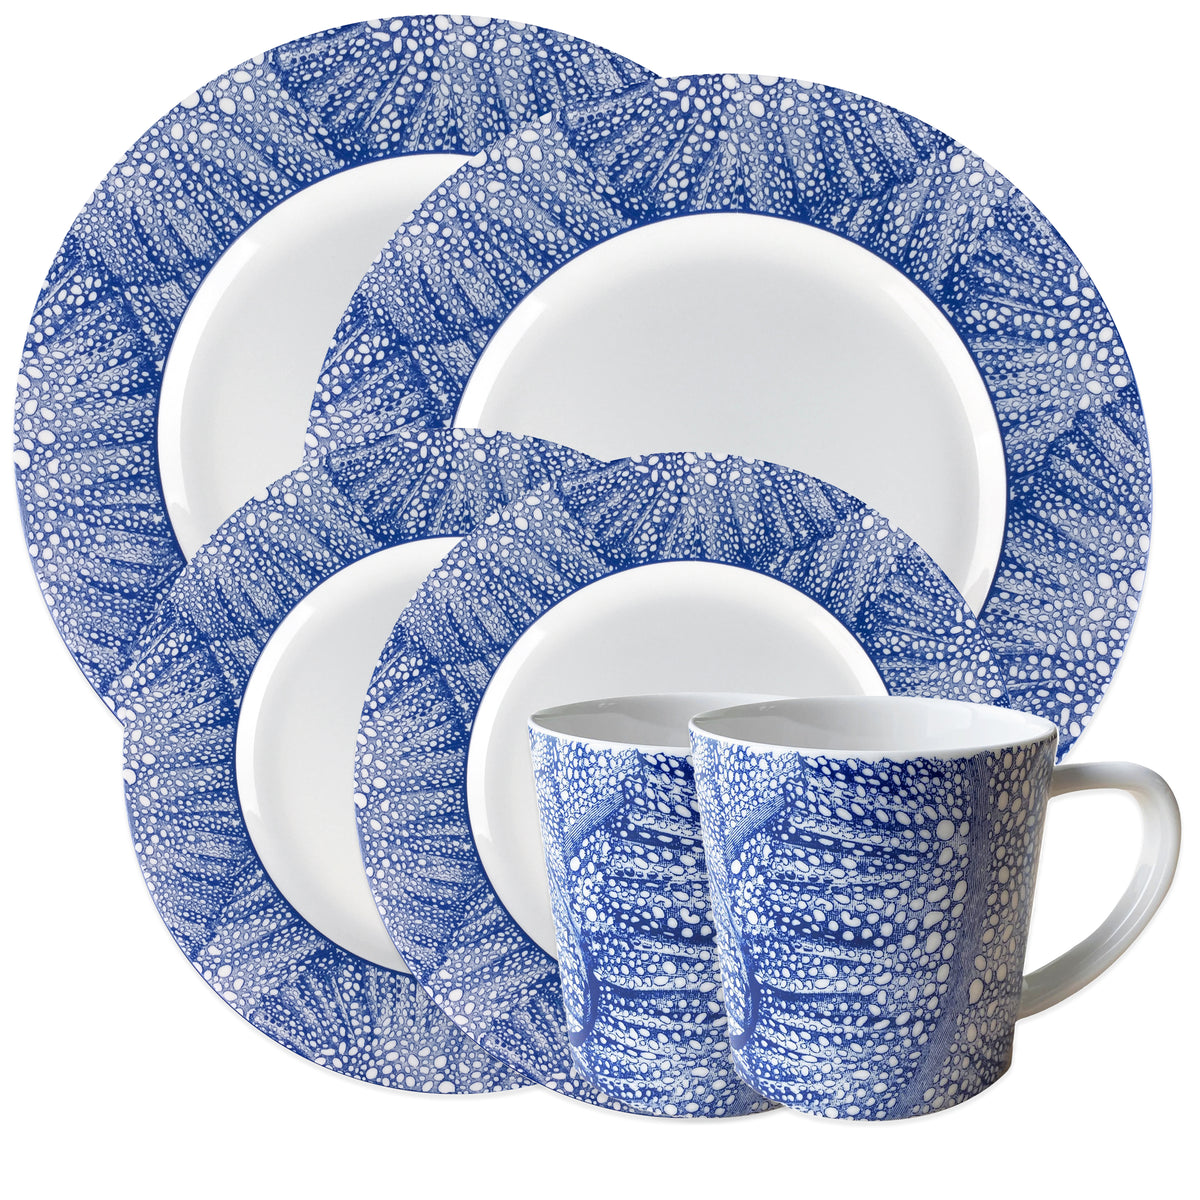 Sea Fan Blue and White Porcelain Dinnerware set for 2 with 2 Dinner Plates, 2 Salad Plates, and 2 Mugs from Caskata